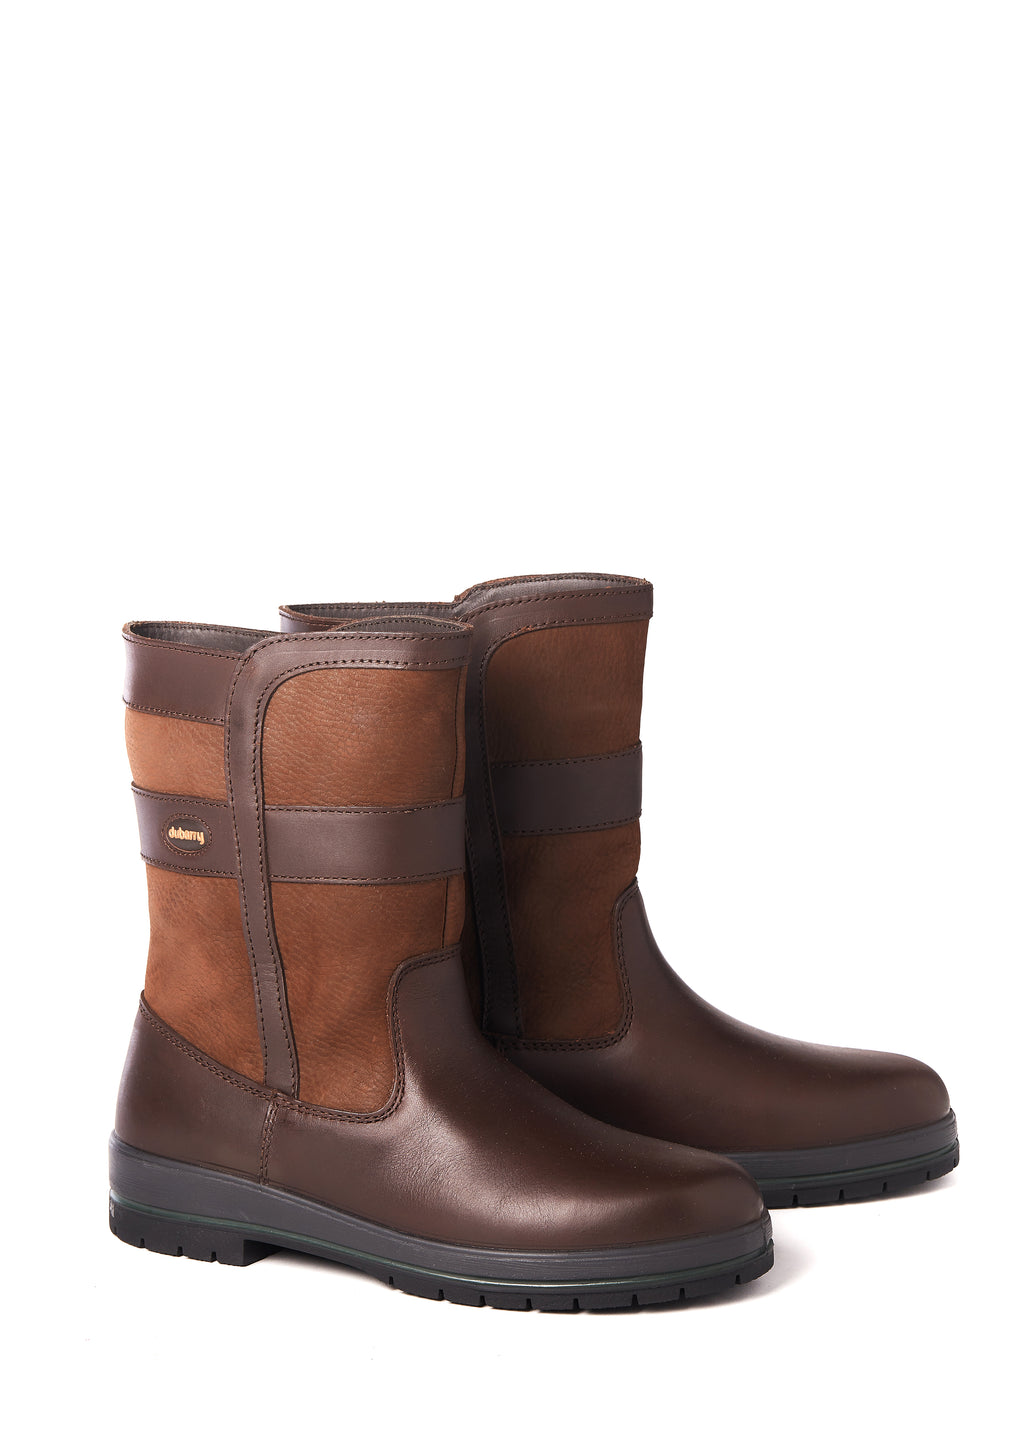 Dubarry Roscommon Country Boot